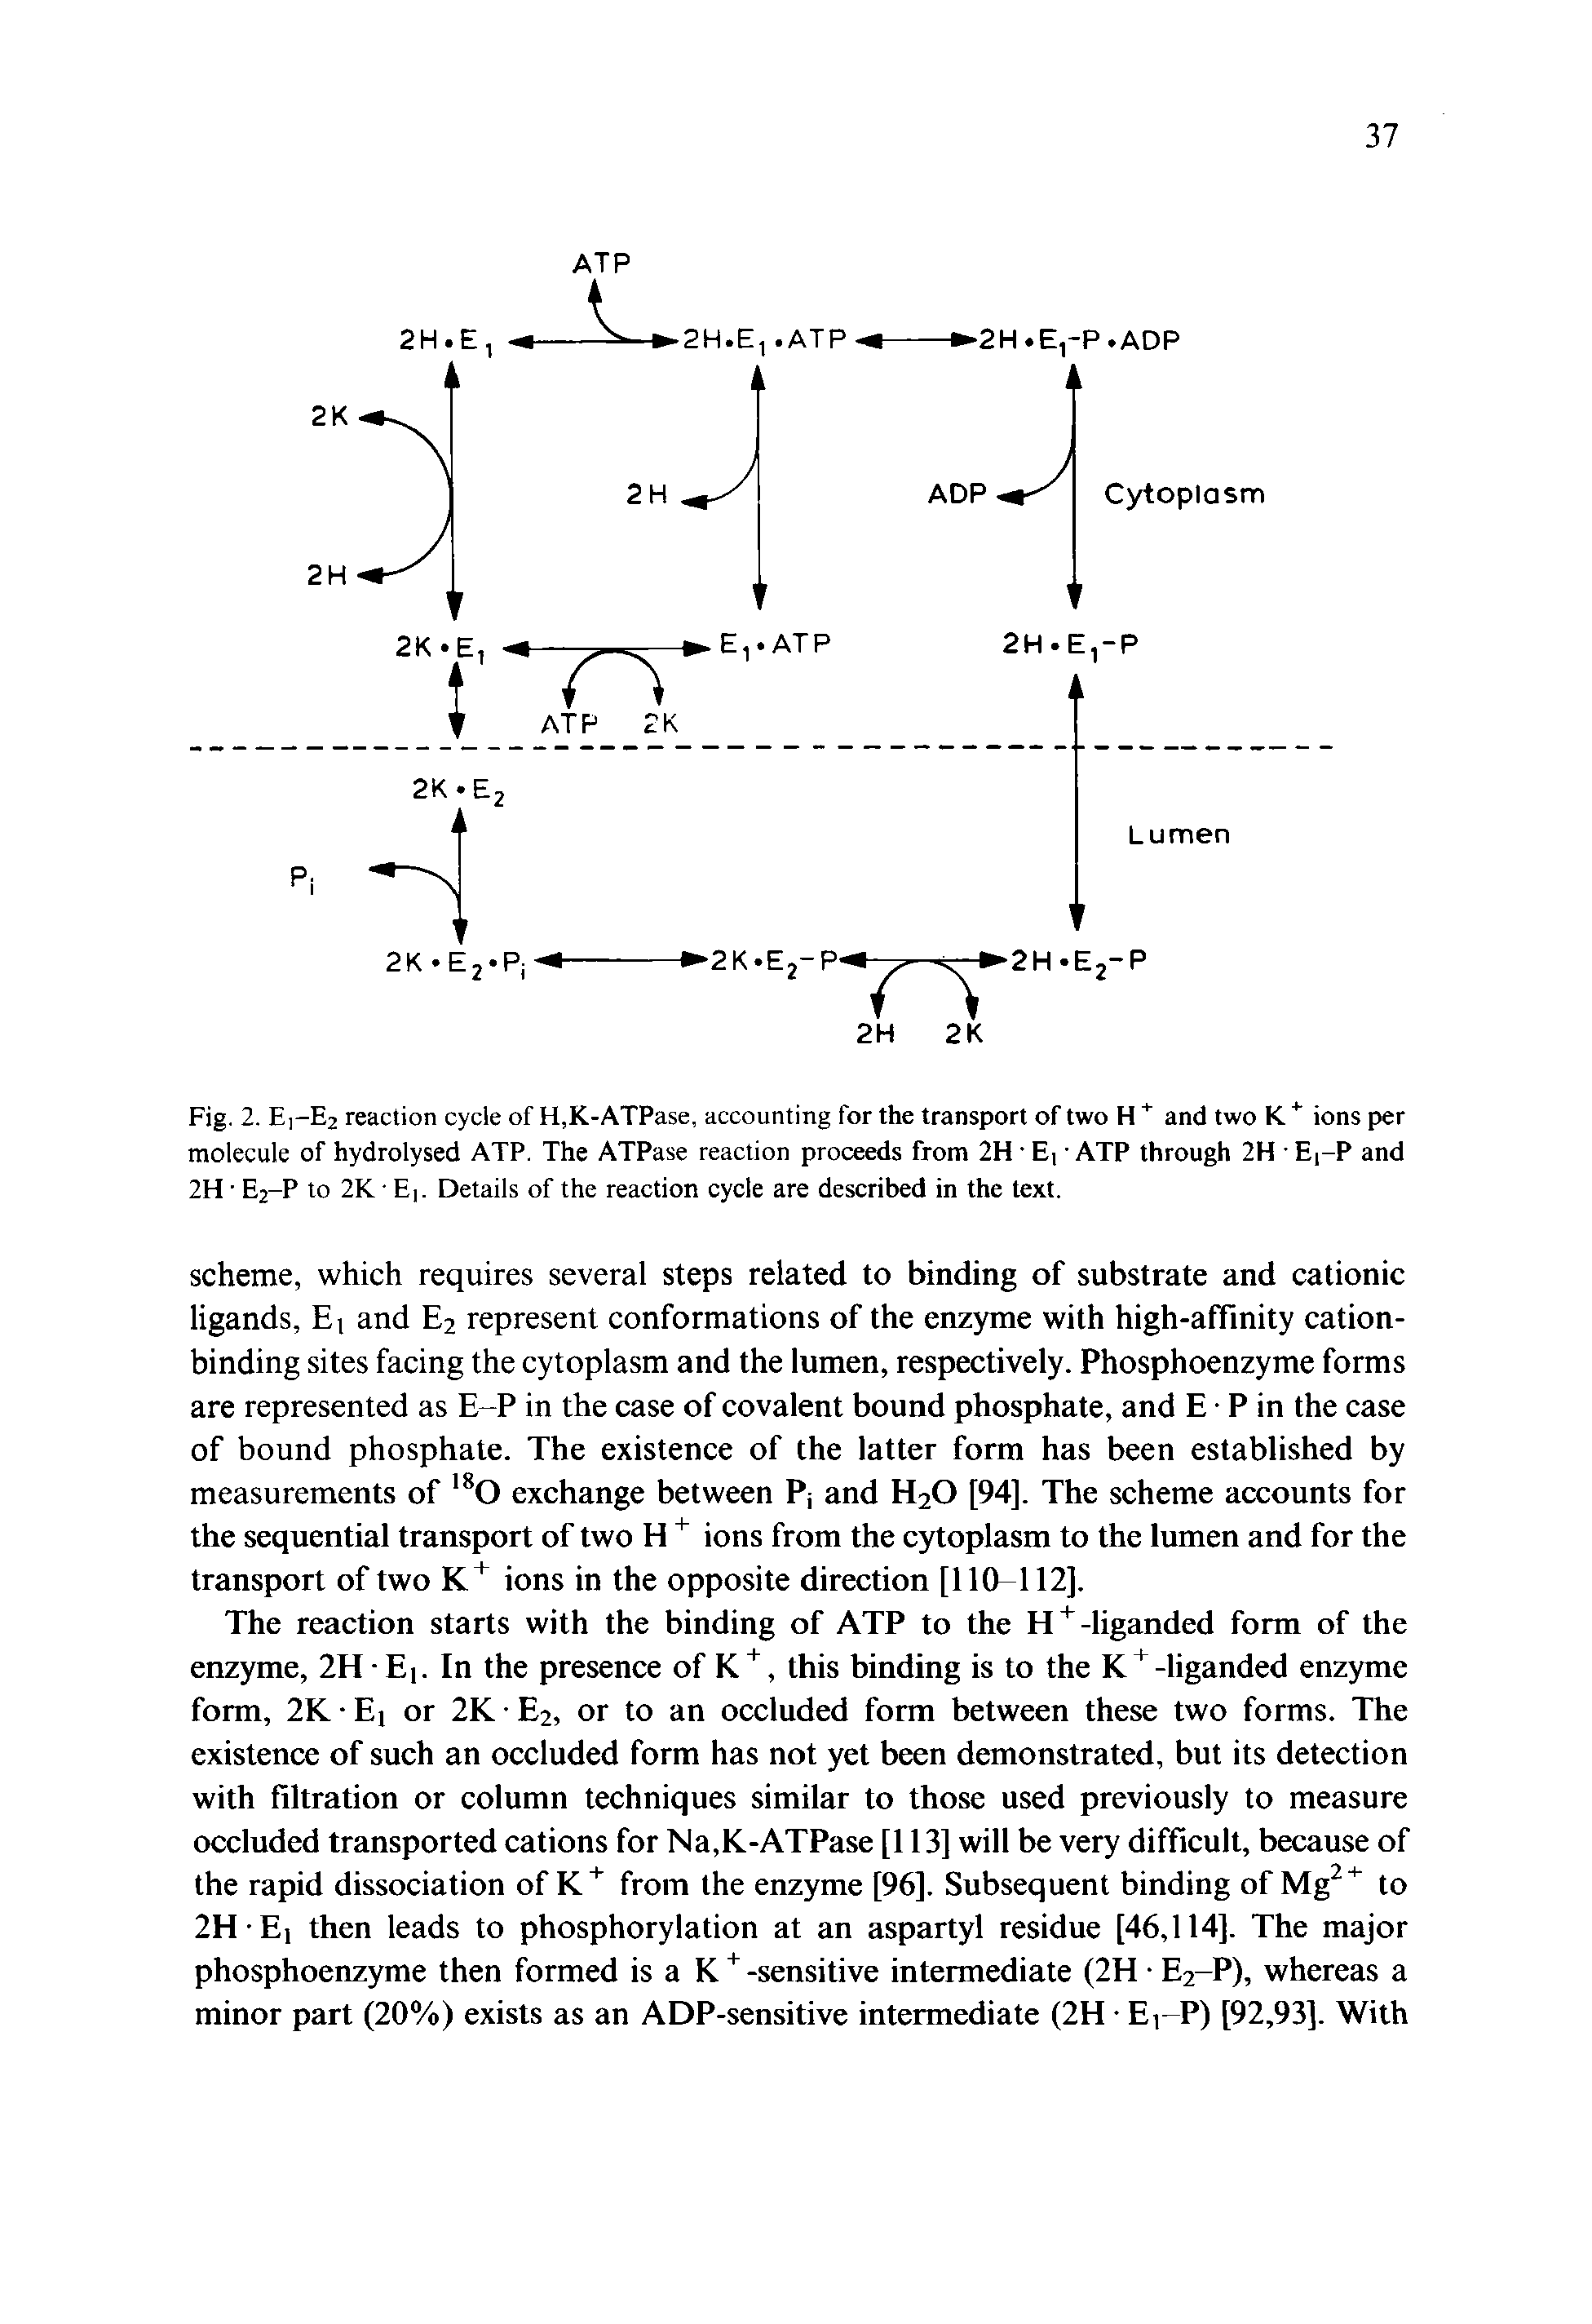 Fig. 2. E]-E2 reaction cycle of H,K-ATPase, accounting for the transport of two H and two K ions per molecule of hydrolysed ATP. The ATPase reaction proceeds from 2H E, ATP through 2H E -P and 2H E2-P to 2K E. Details of the reaction cycle are described in the text.